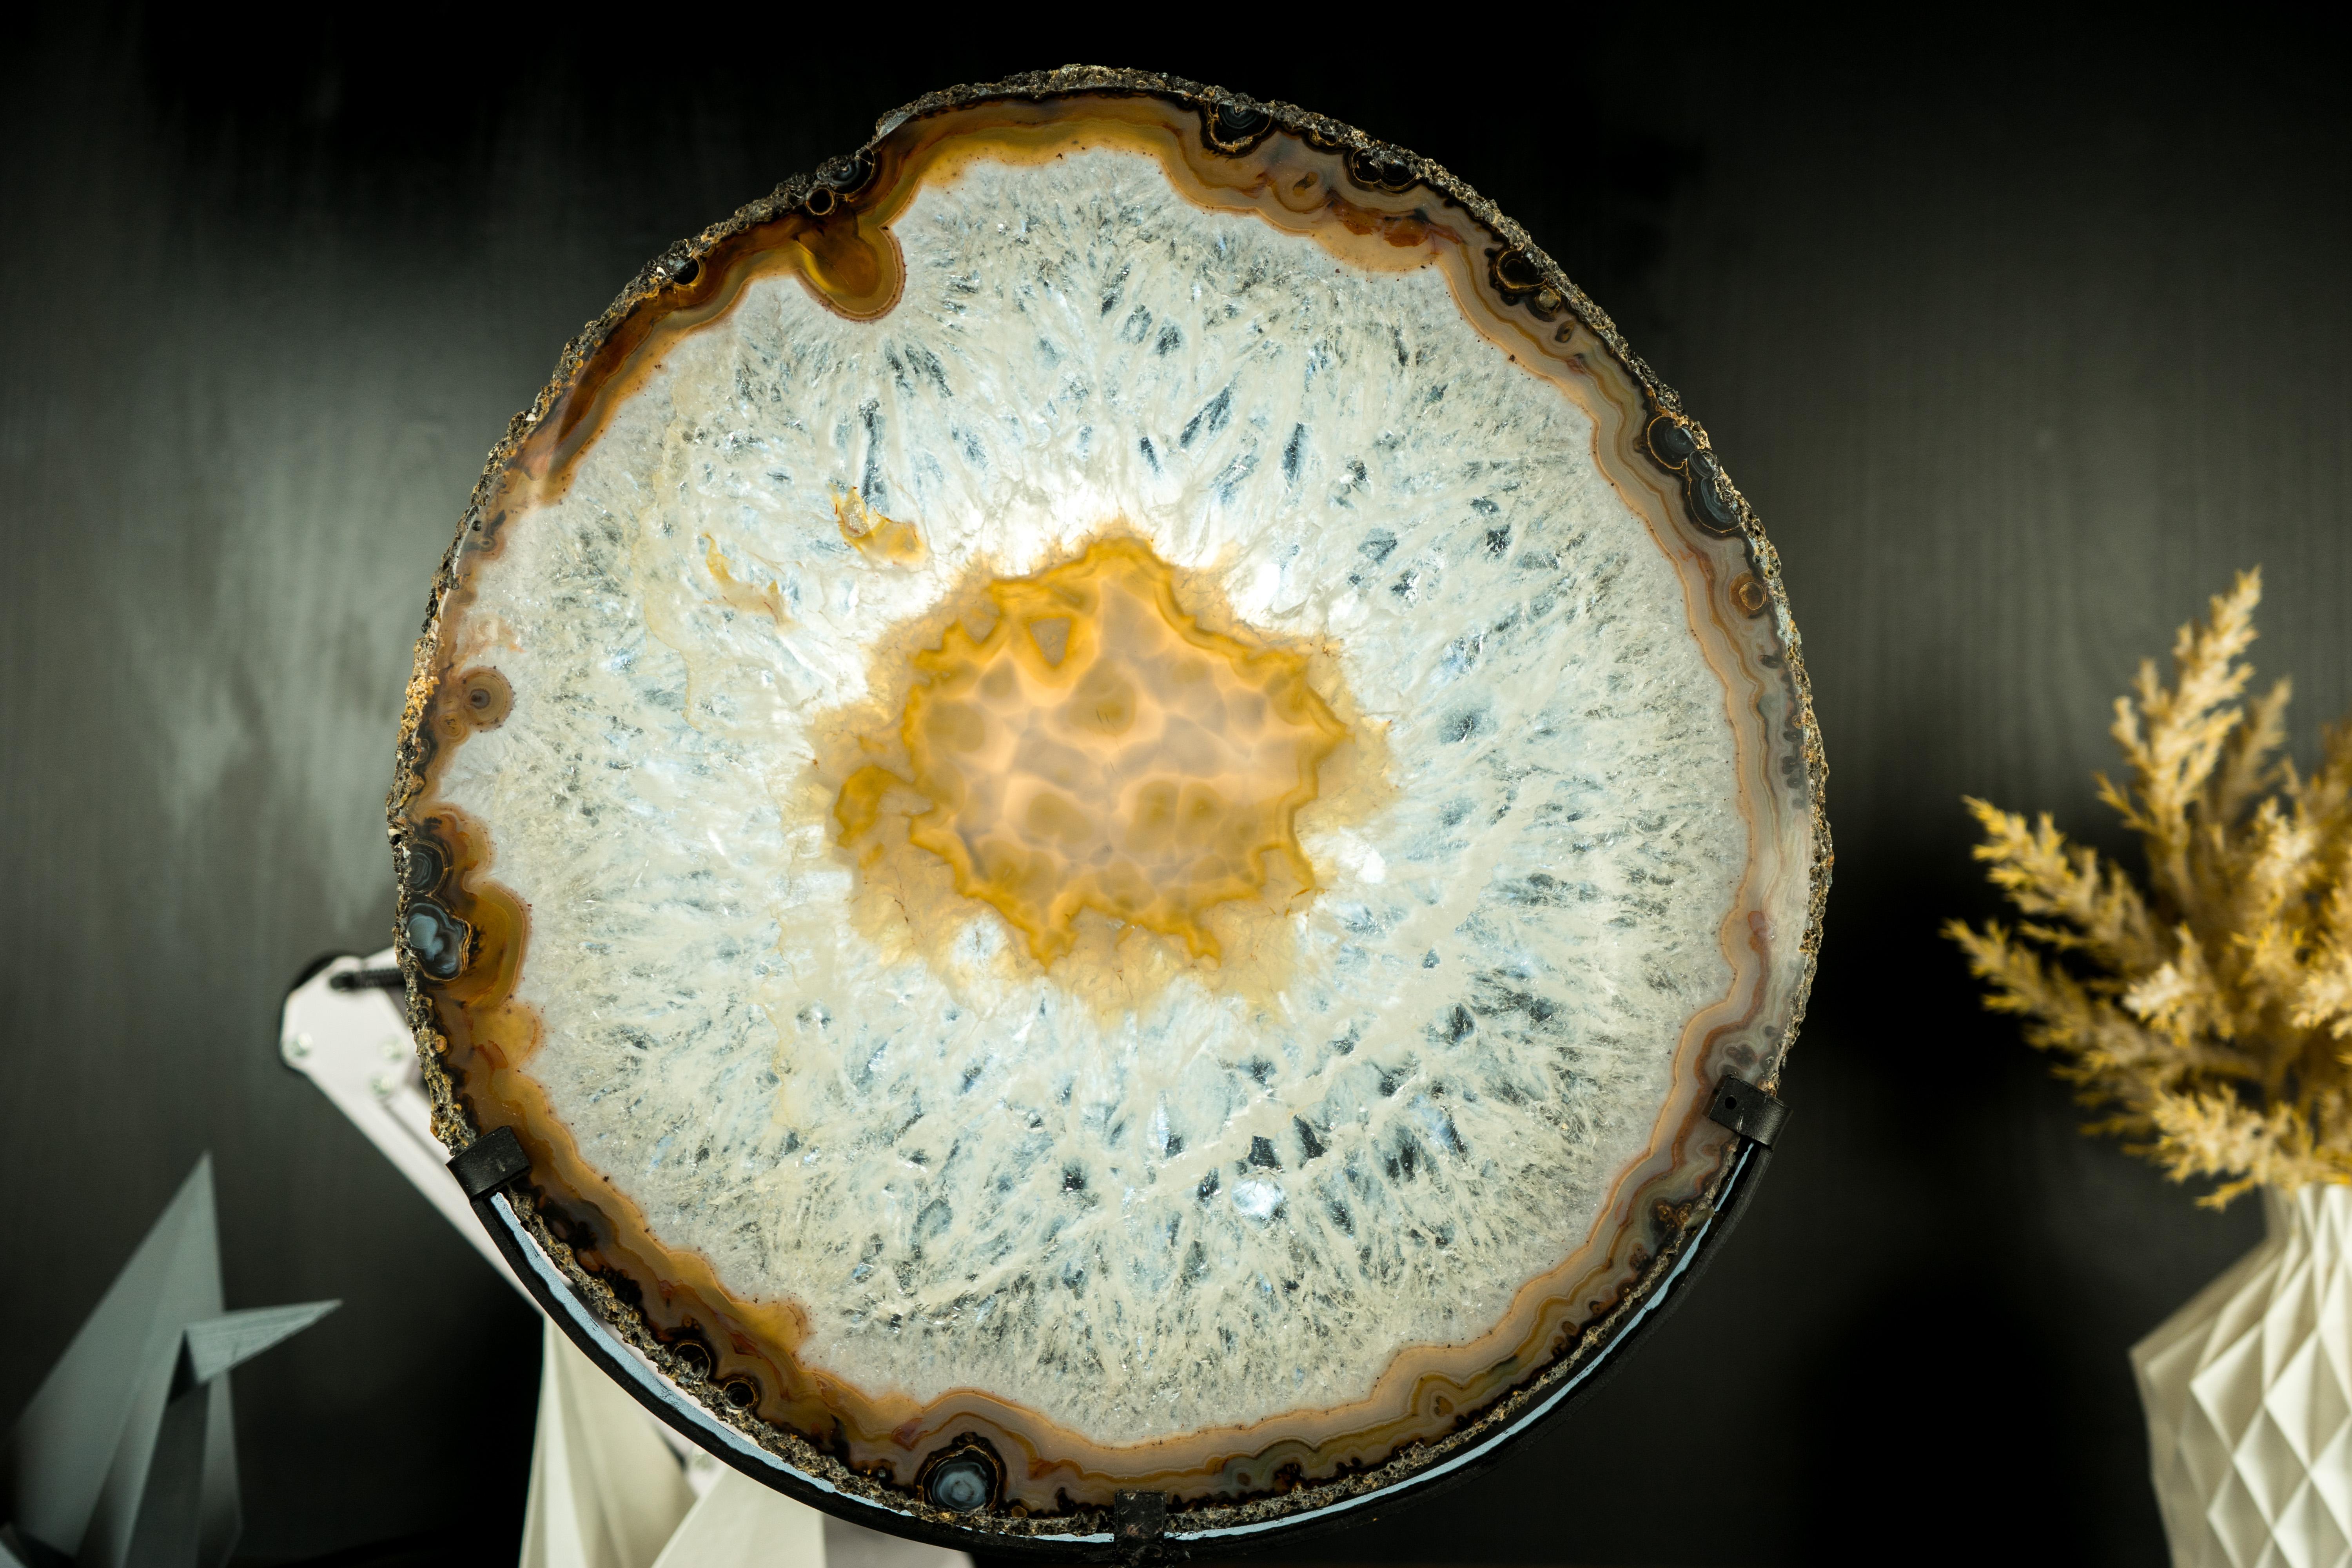 World-Class Large Lace Agate Slice, with Ice-Like Crystal and Colorful Agate For Sale 4